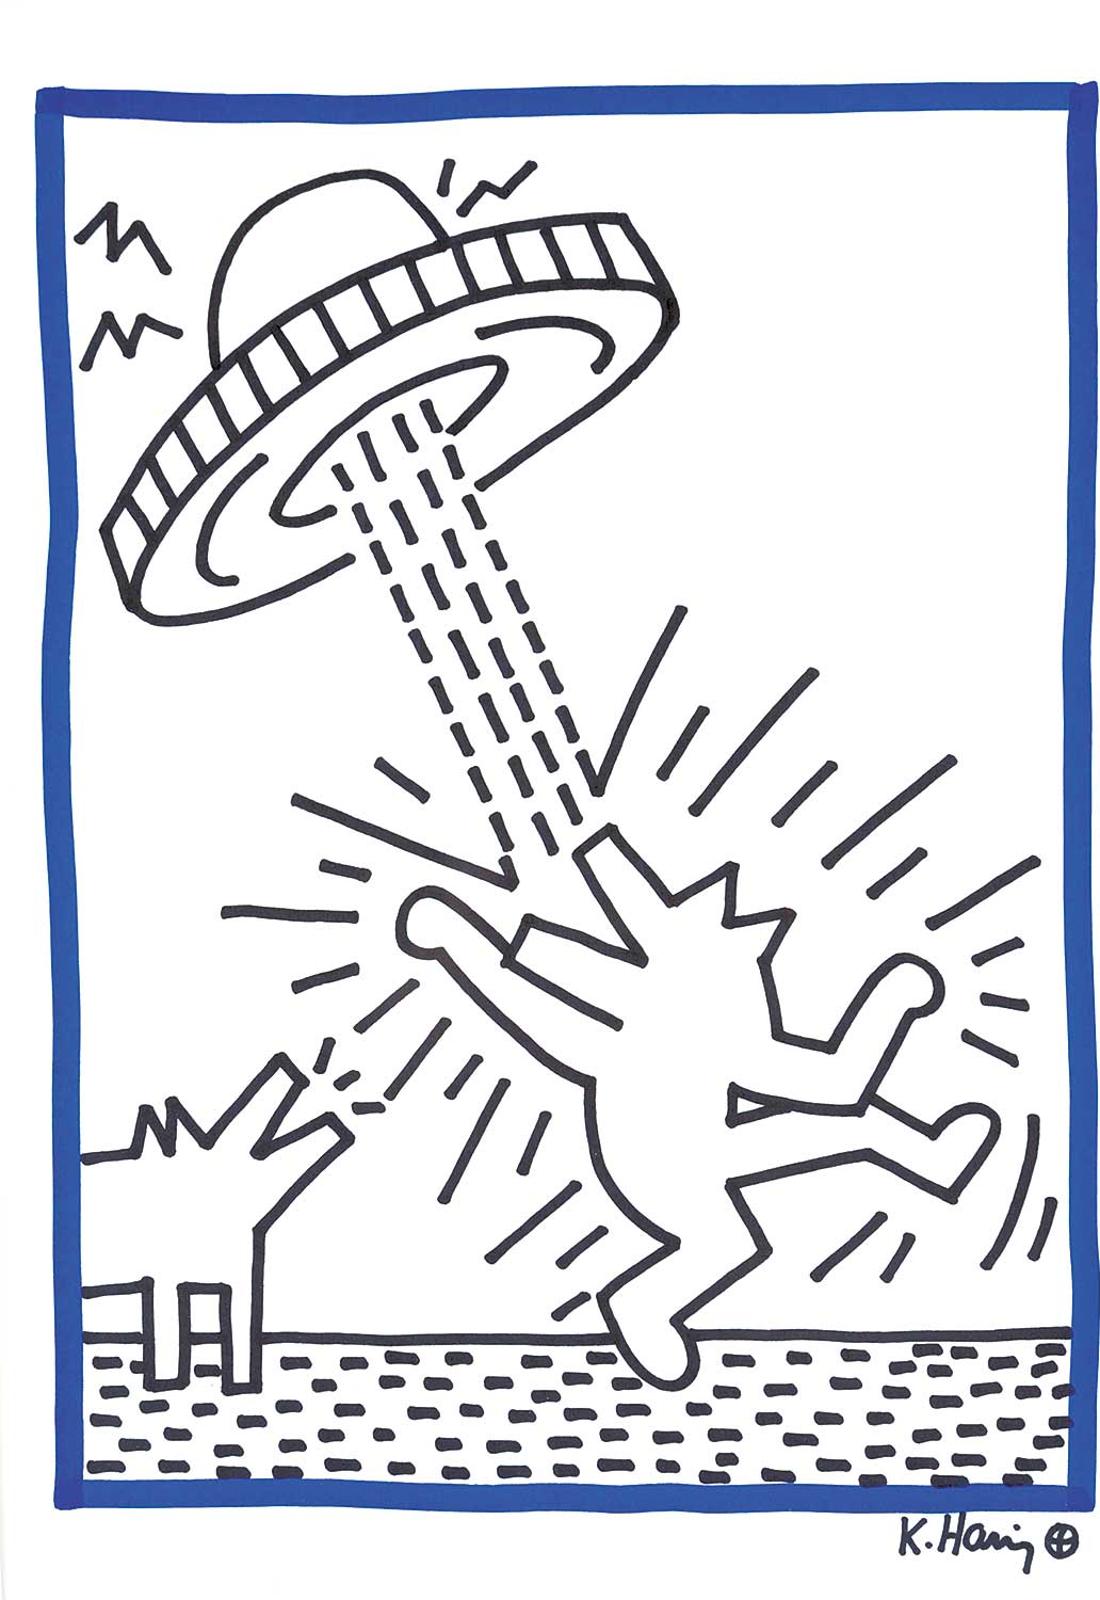 Keith Haring (1958-1990) - Untitled - Canine Abduction